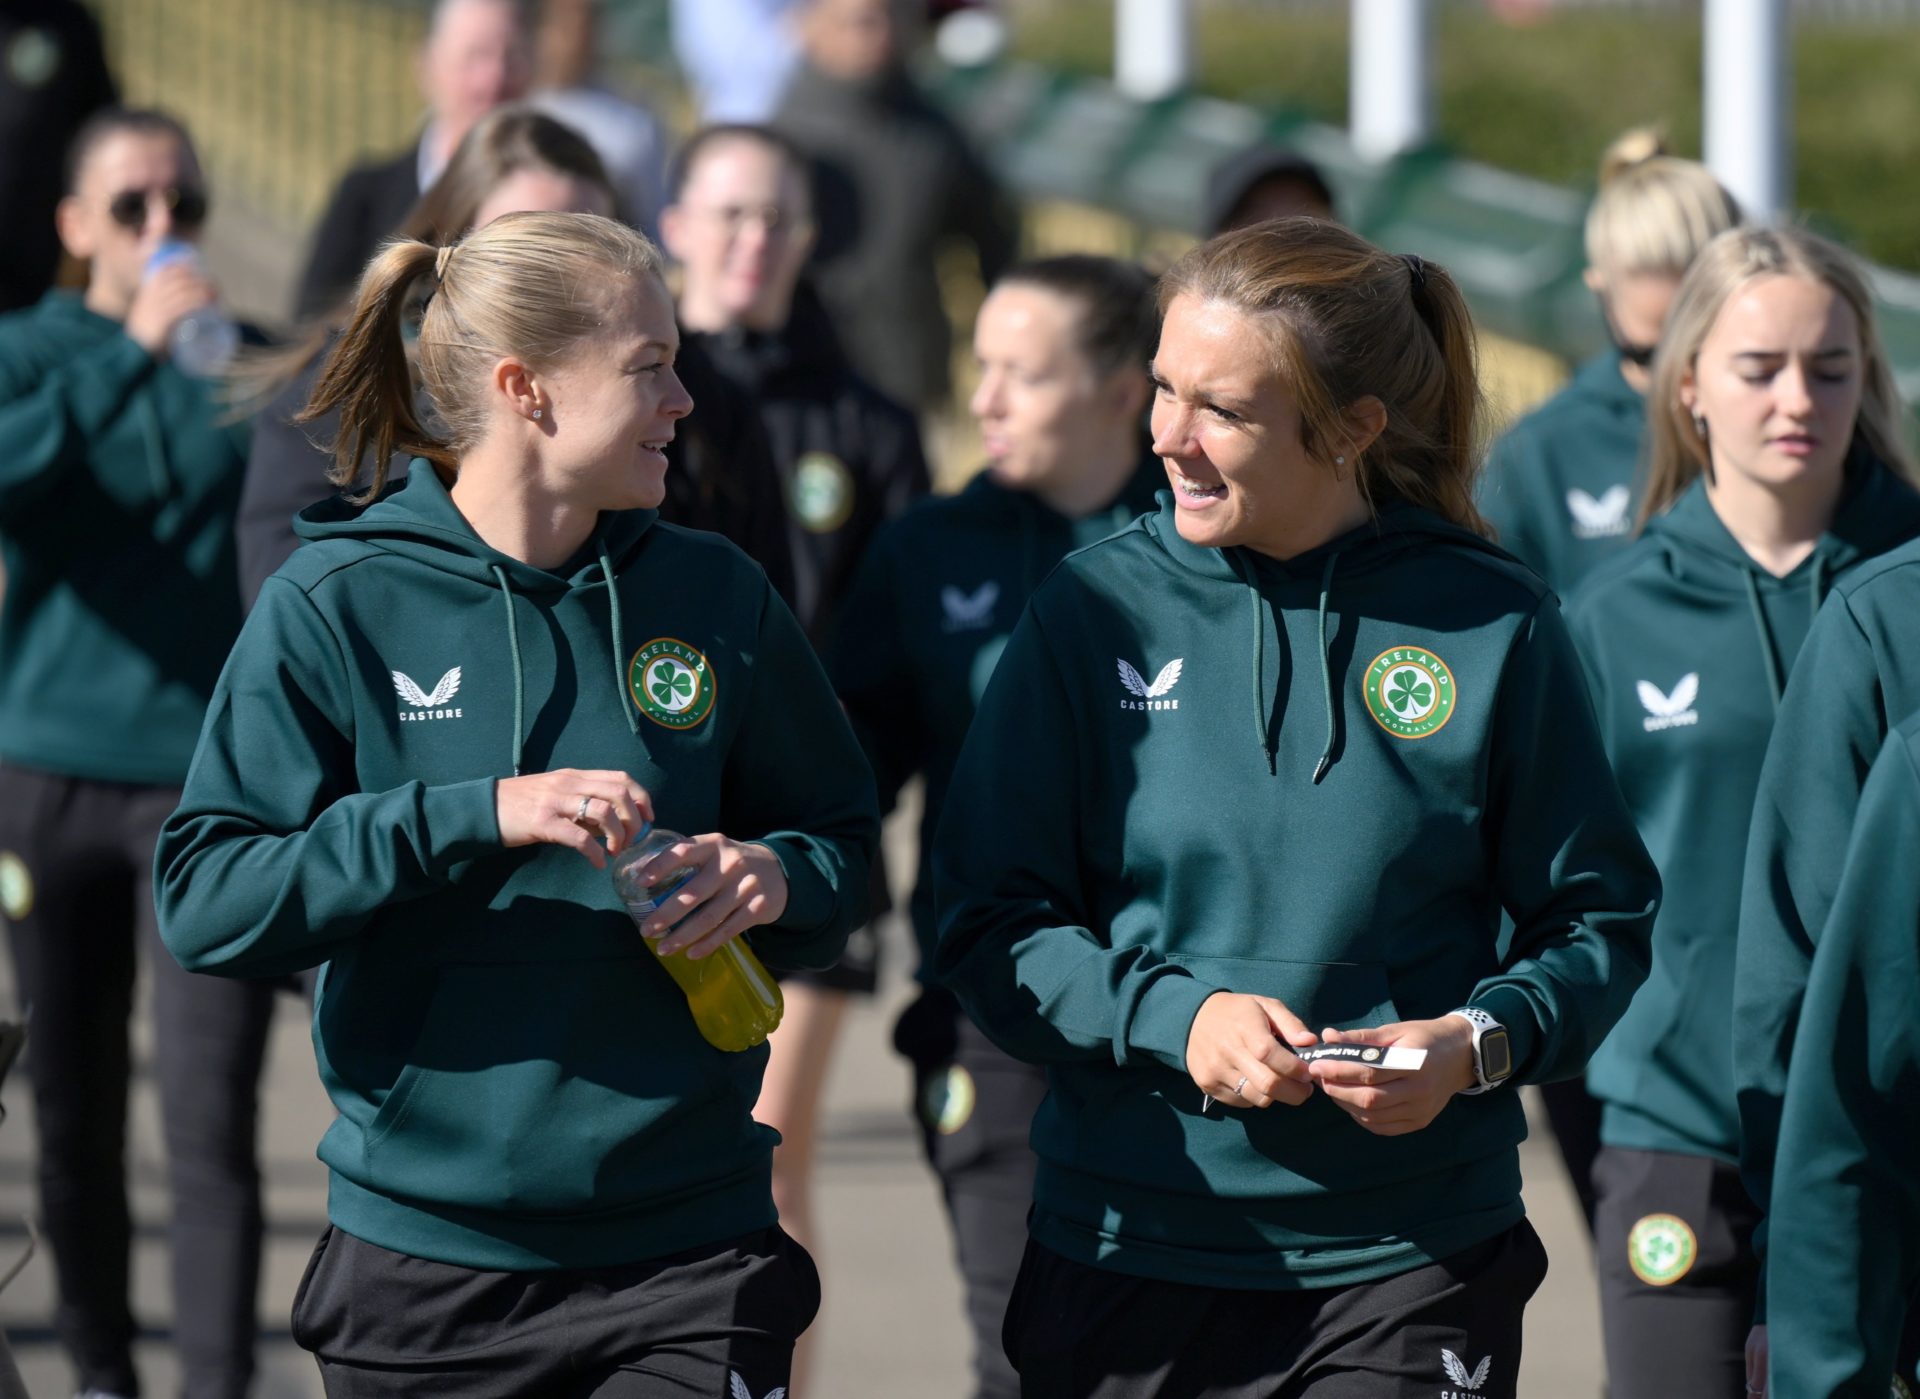 Republic of Ireland goalkeeper Grace Moloney, right, and Ruesha Littlejohn on the Pyrmont Bridge during a team walk ahead of the FIFA Women's World Cup 